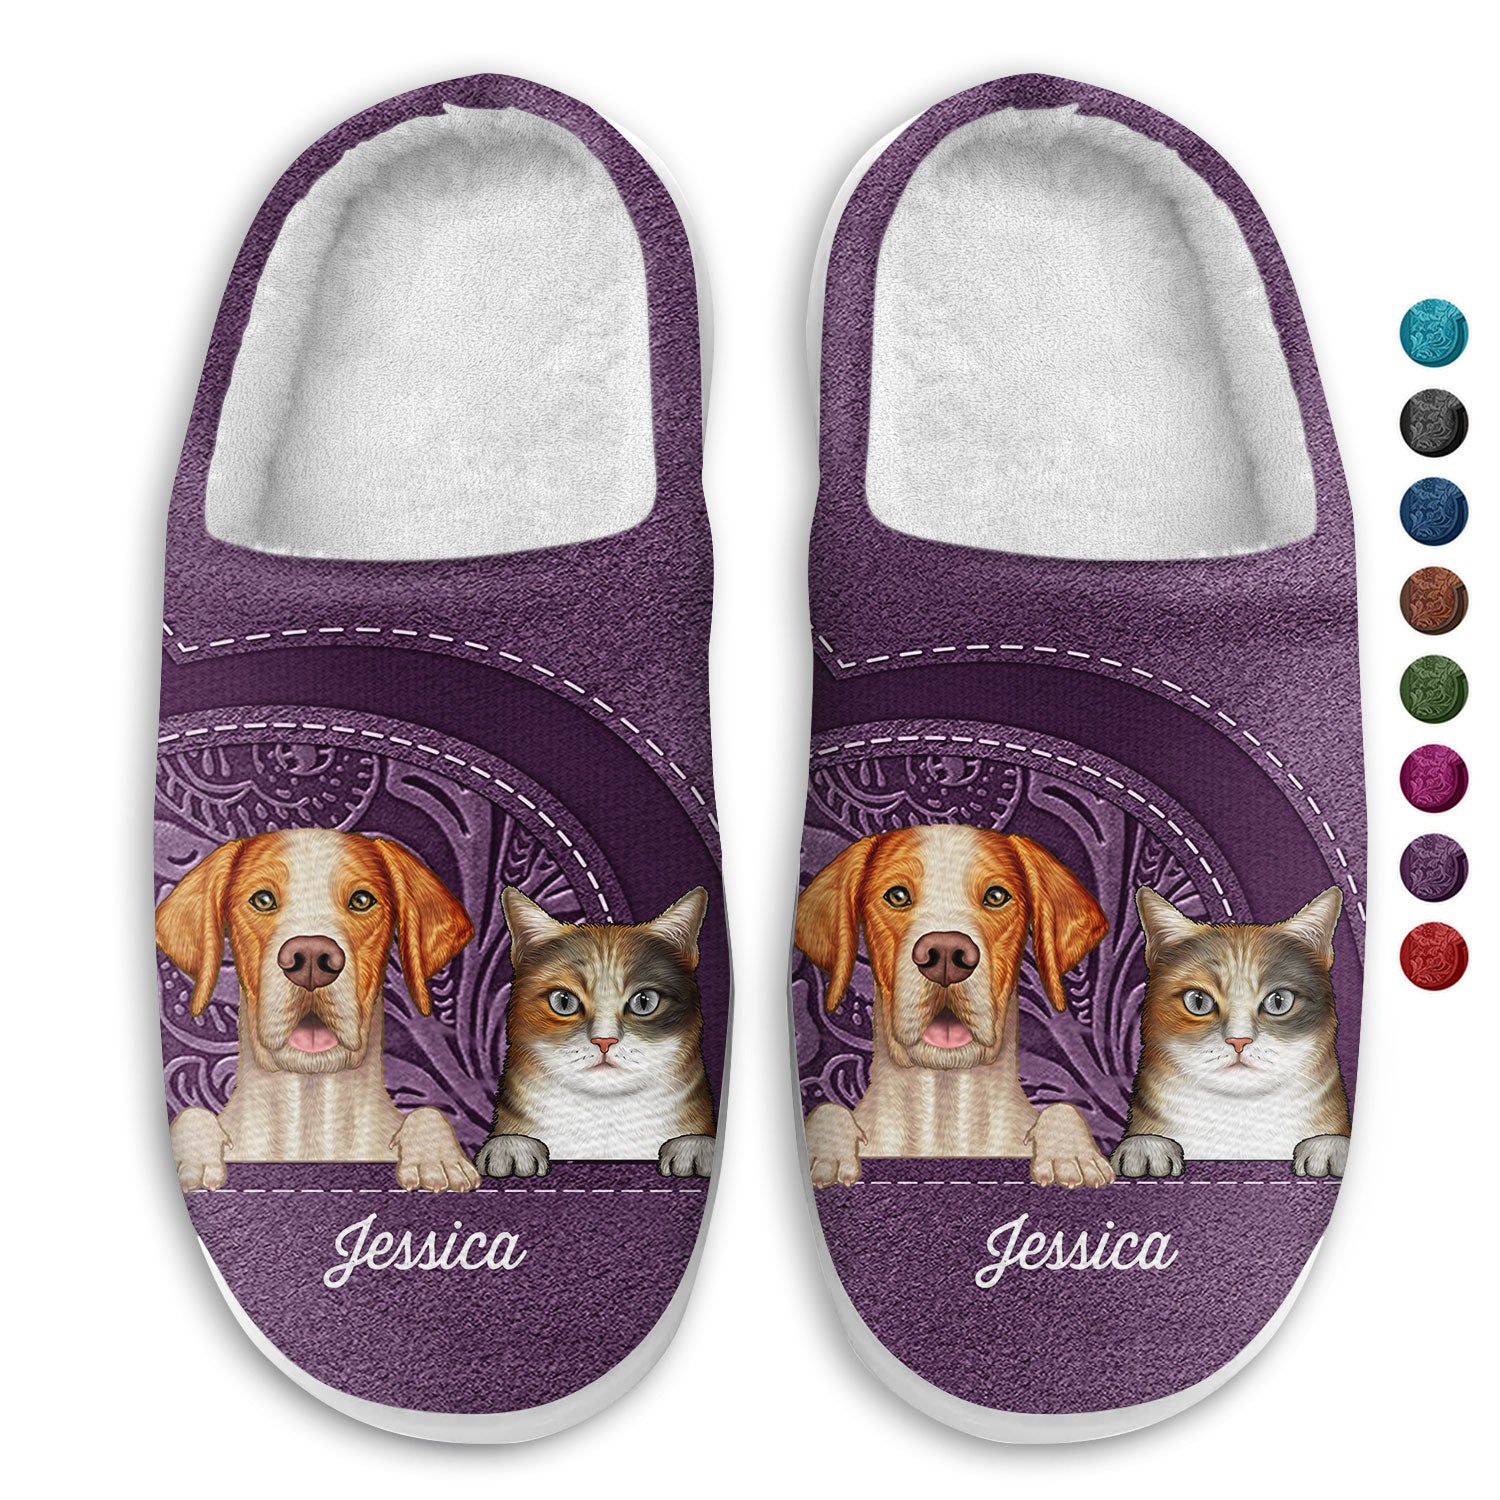 Cute Dogs And Cats Aesthetic Pattern - Birthday, Loving Gift For Pet Lovers, Dog Mom, Cat Mom - Personalized Fluffy Slippers